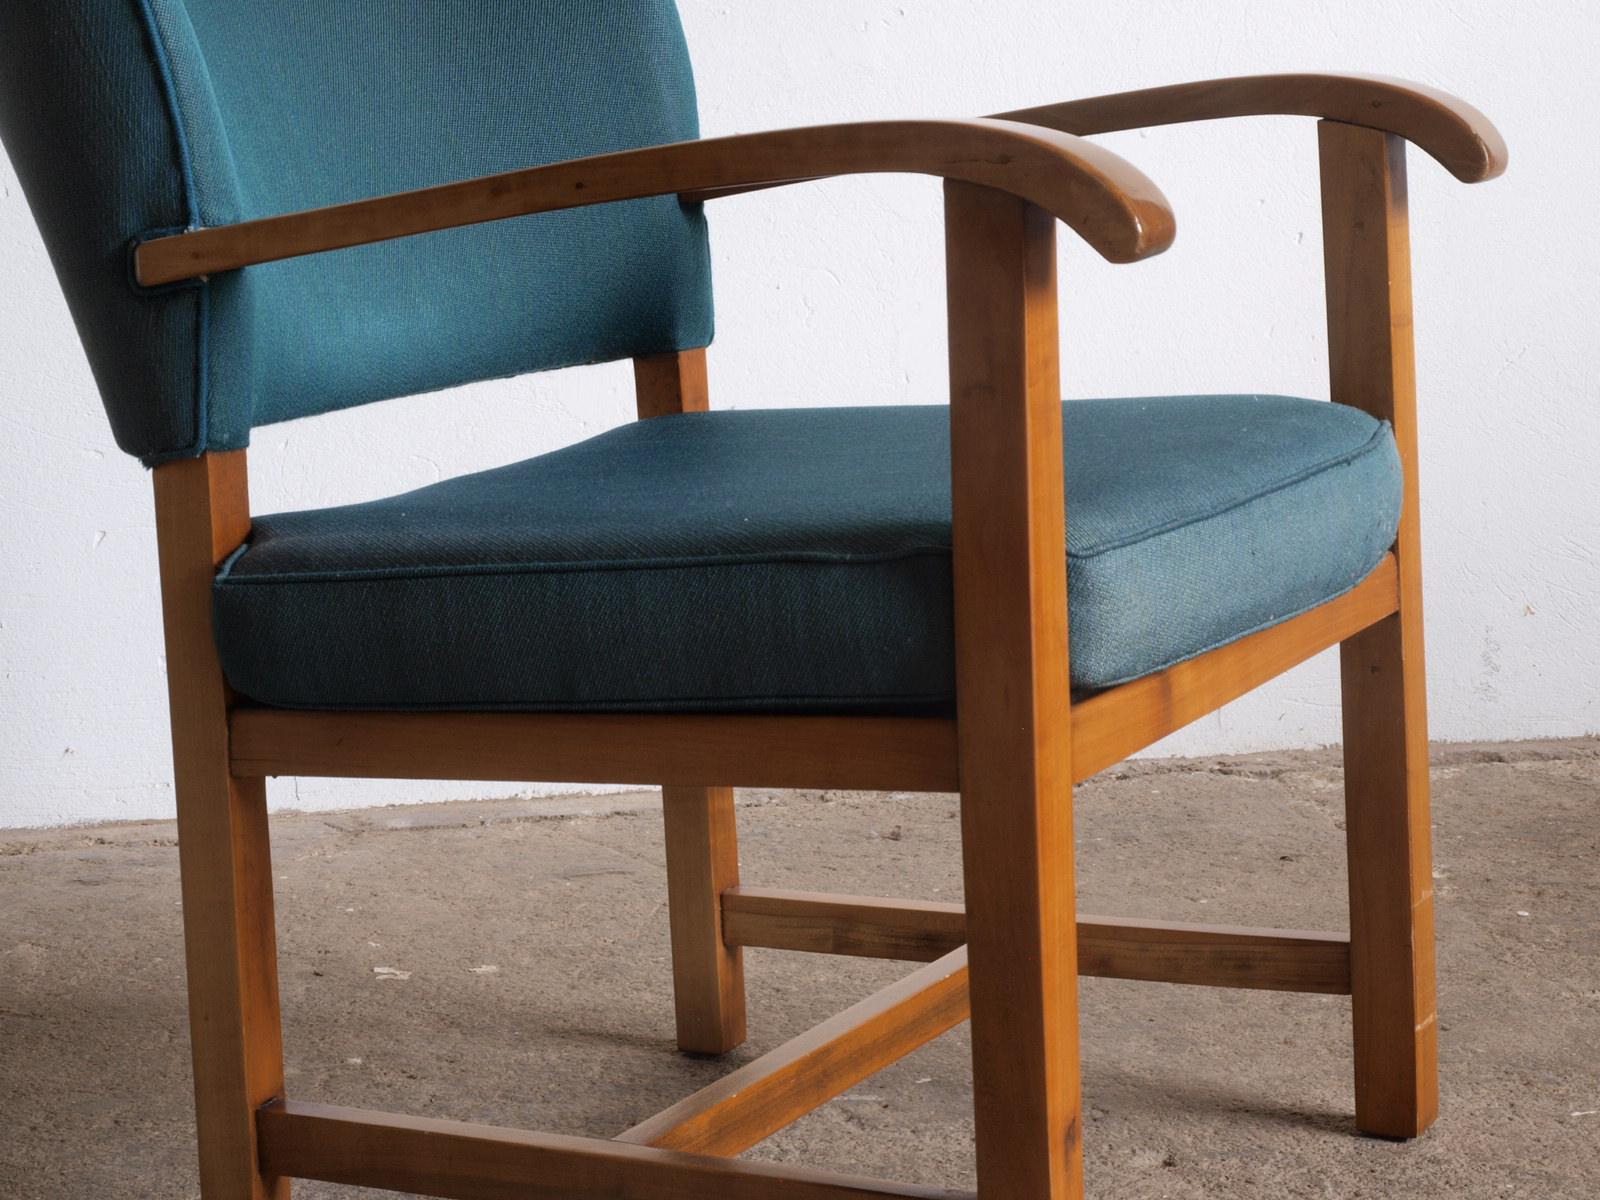 Fruitwood Knoll Lounge Chairs ca. 1940s